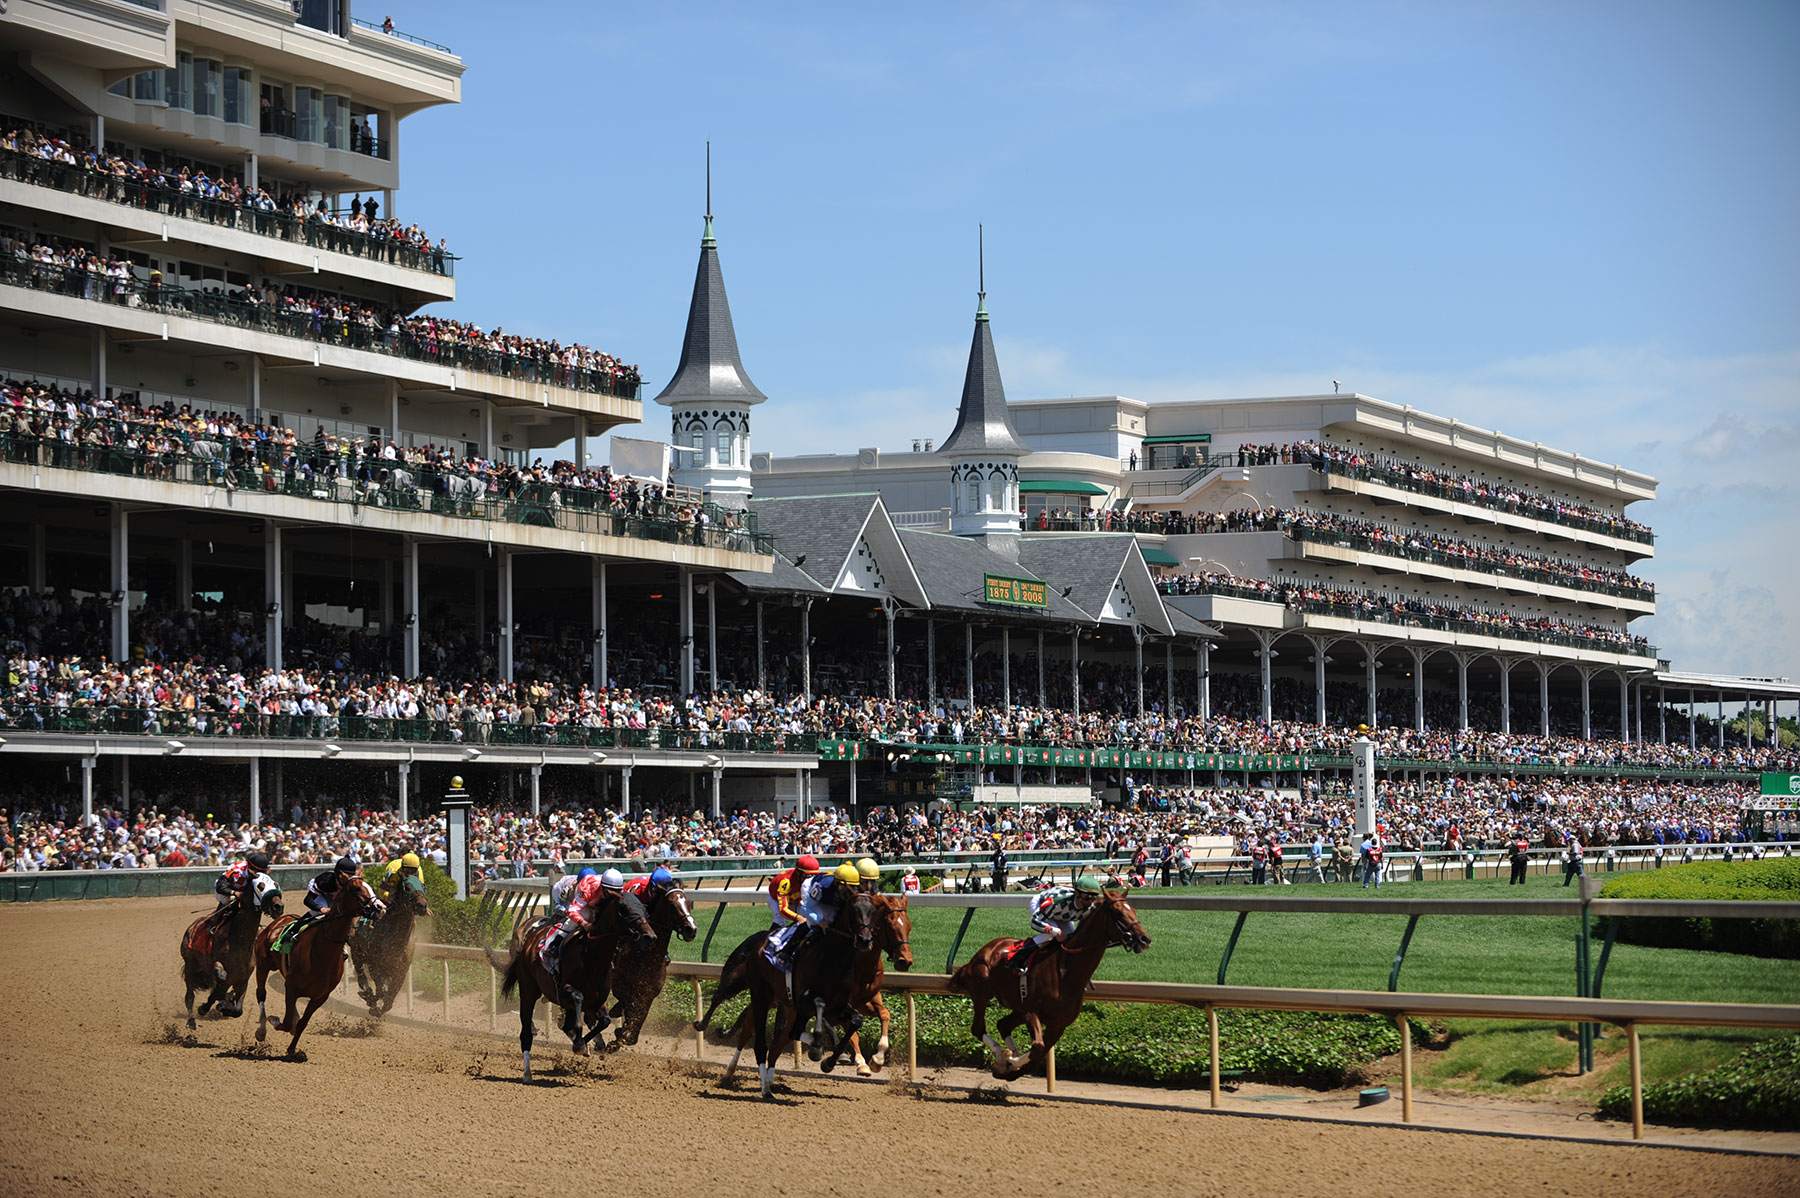 does churchill downs do tours